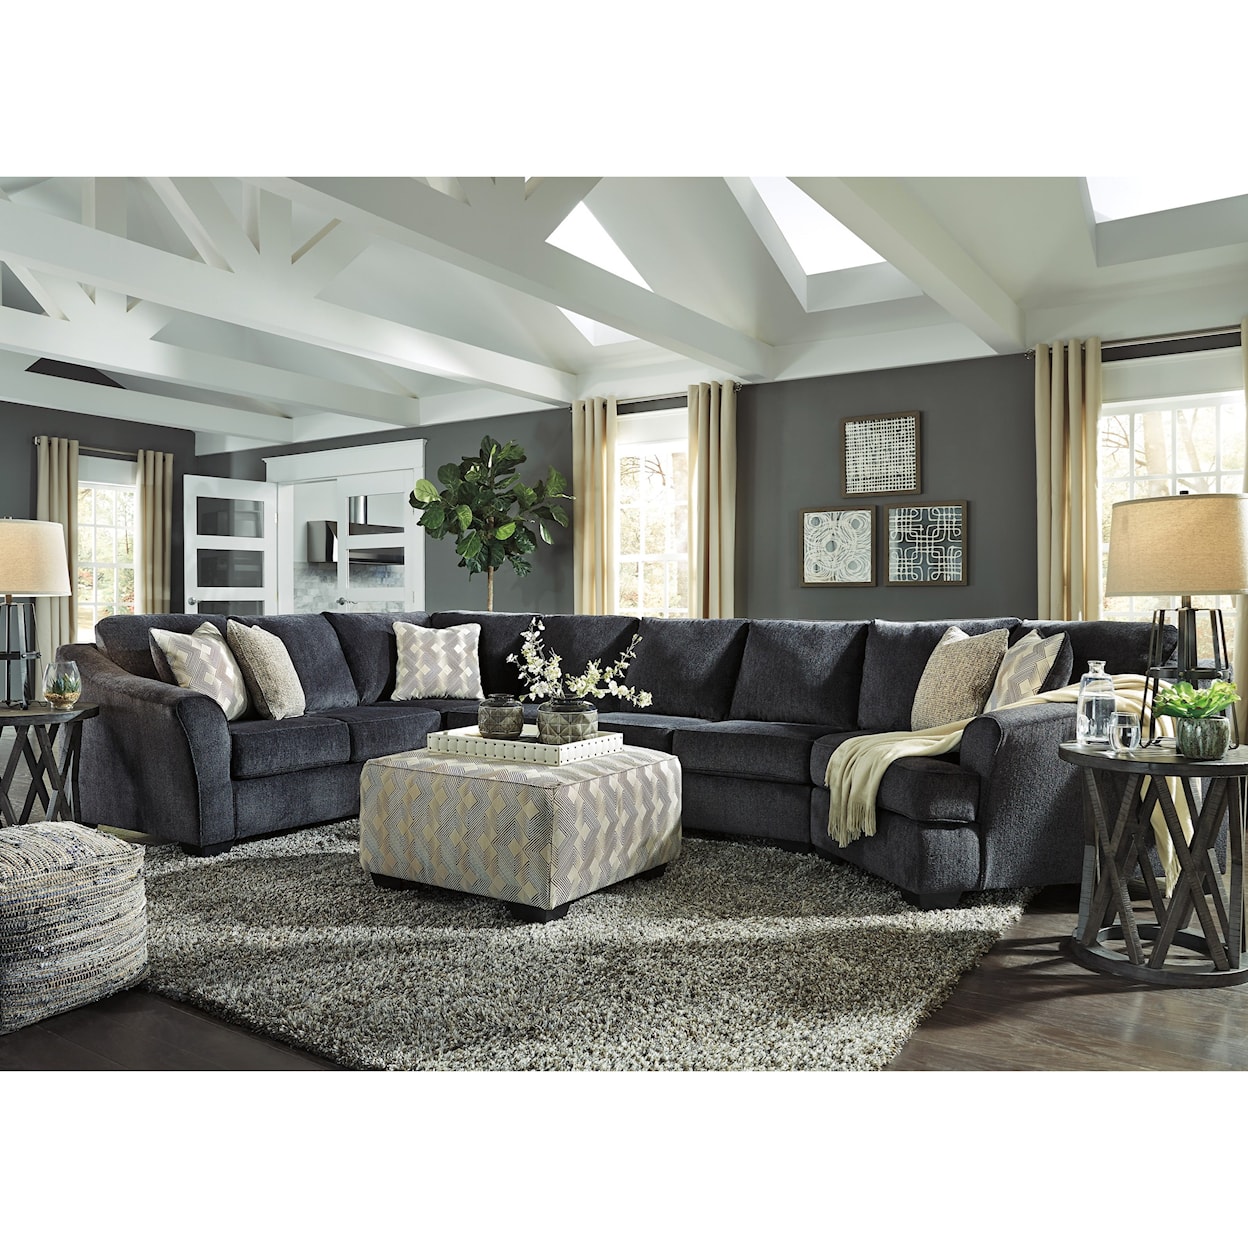 Ashley Furniture Signature Design Eltmann 4-Piece Sectional with Right Cuddler